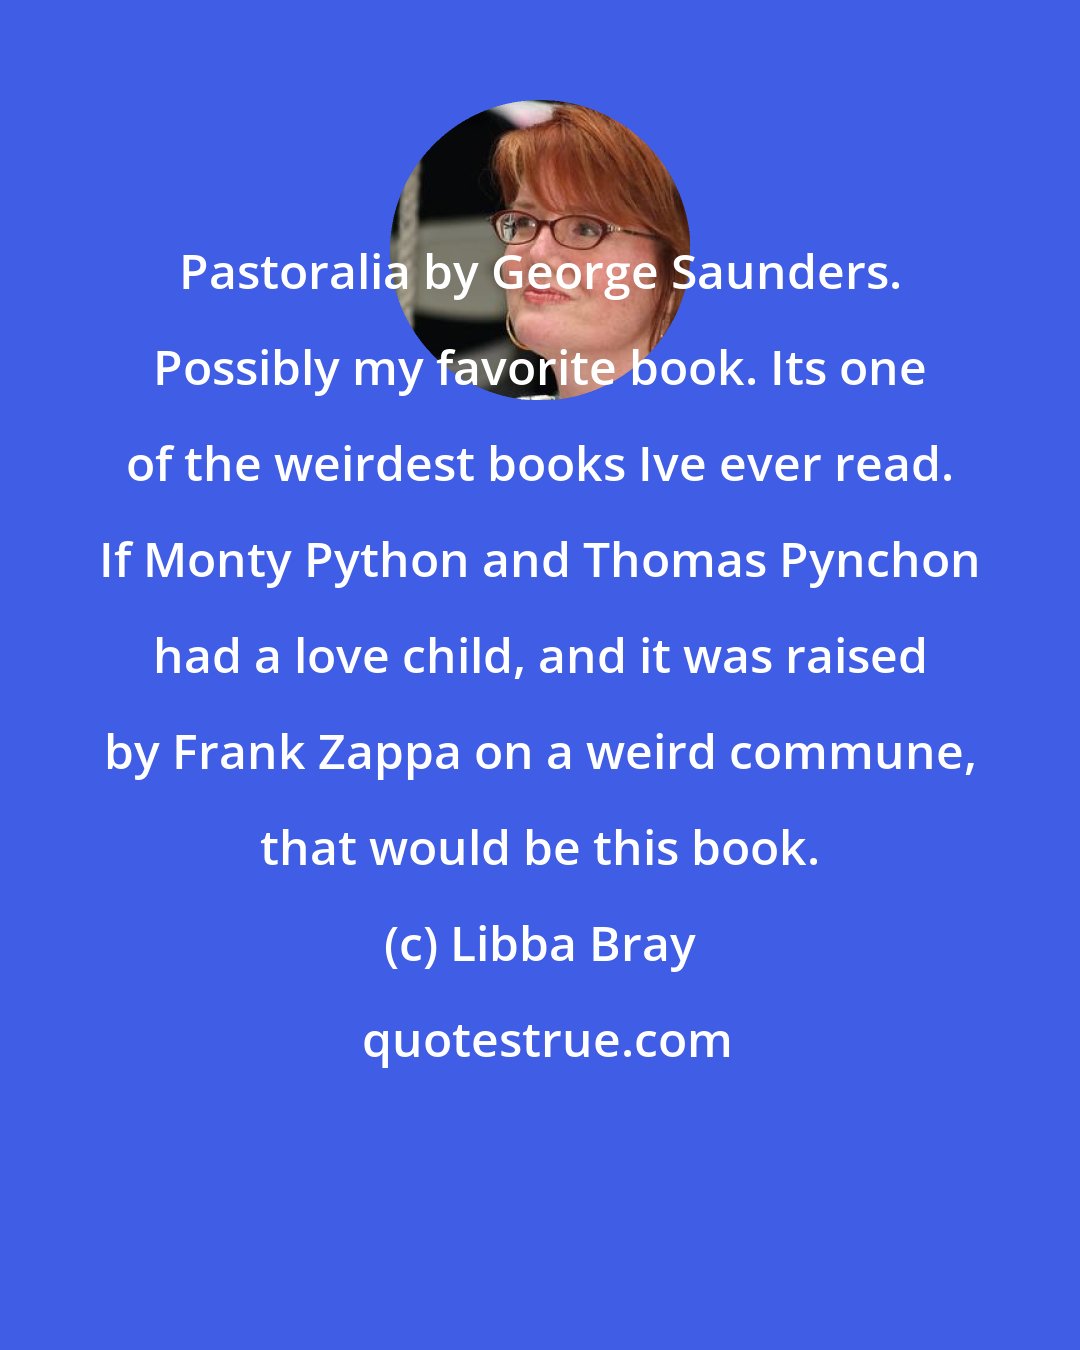 Libba Bray: Pastoralia by George Saunders. Possibly my favorite book. Its one of the weirdest books Ive ever read. If Monty Python and Thomas Pynchon had a love child, and it was raised by Frank Zappa on a weird commune, that would be this book.